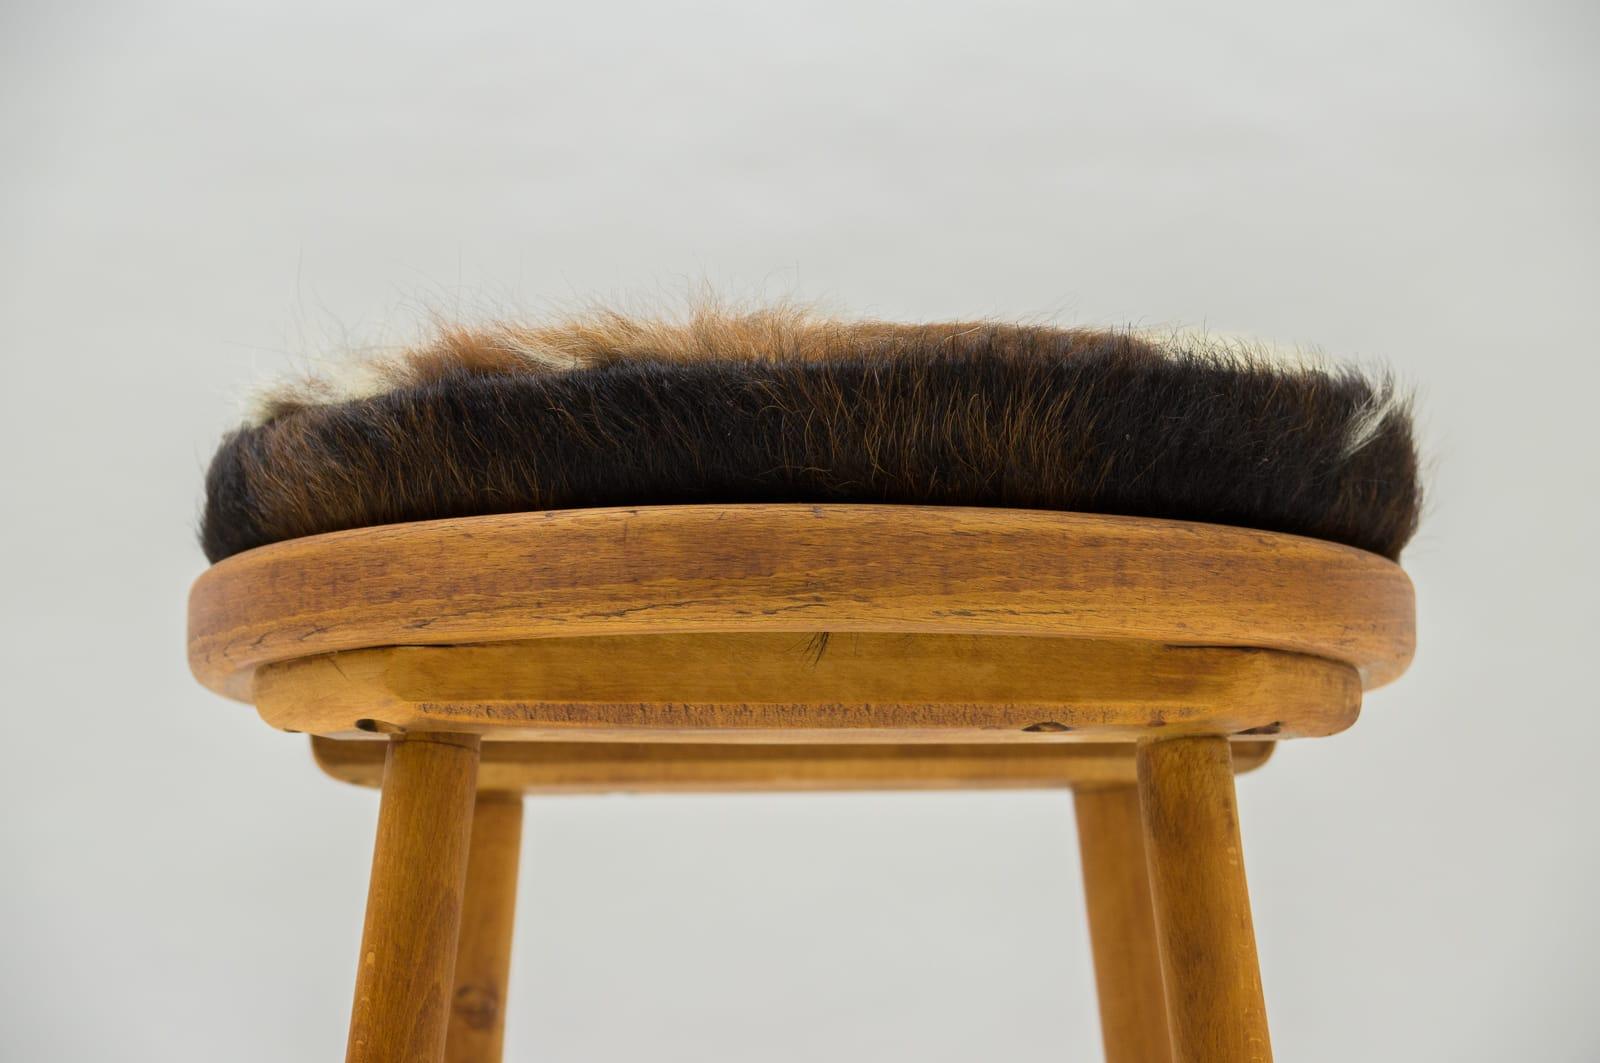 20th Century Mid-Century Modern Wooden Stool with Cow Skin Upholstery, France, 1950s